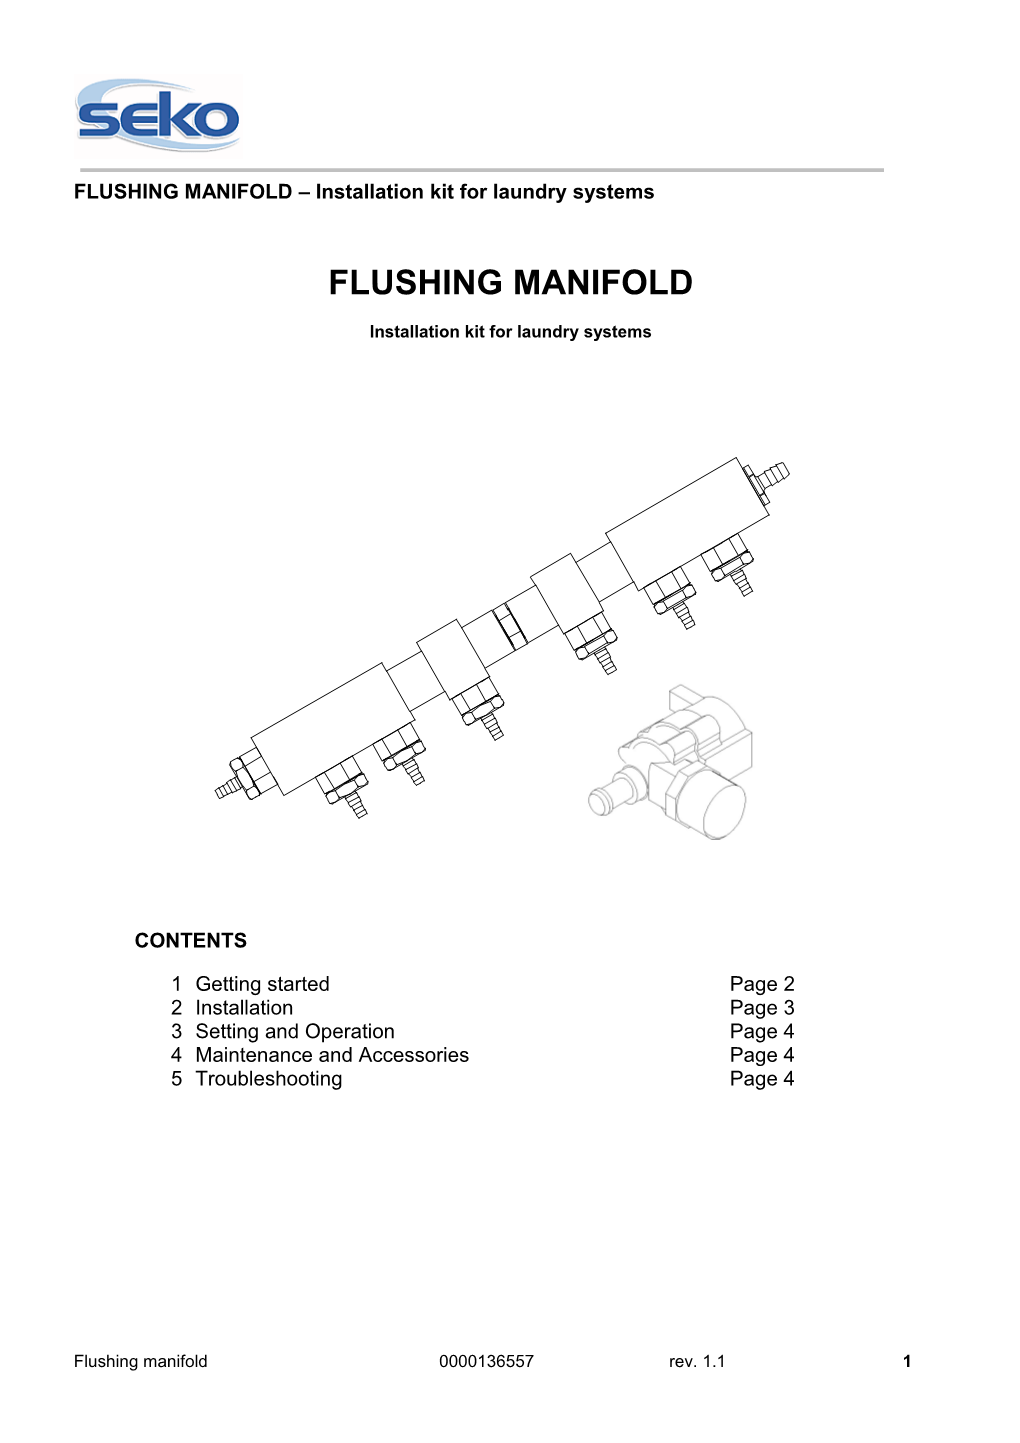 FLUSHING MANIFOLD Installation Kit for Laundry Systems